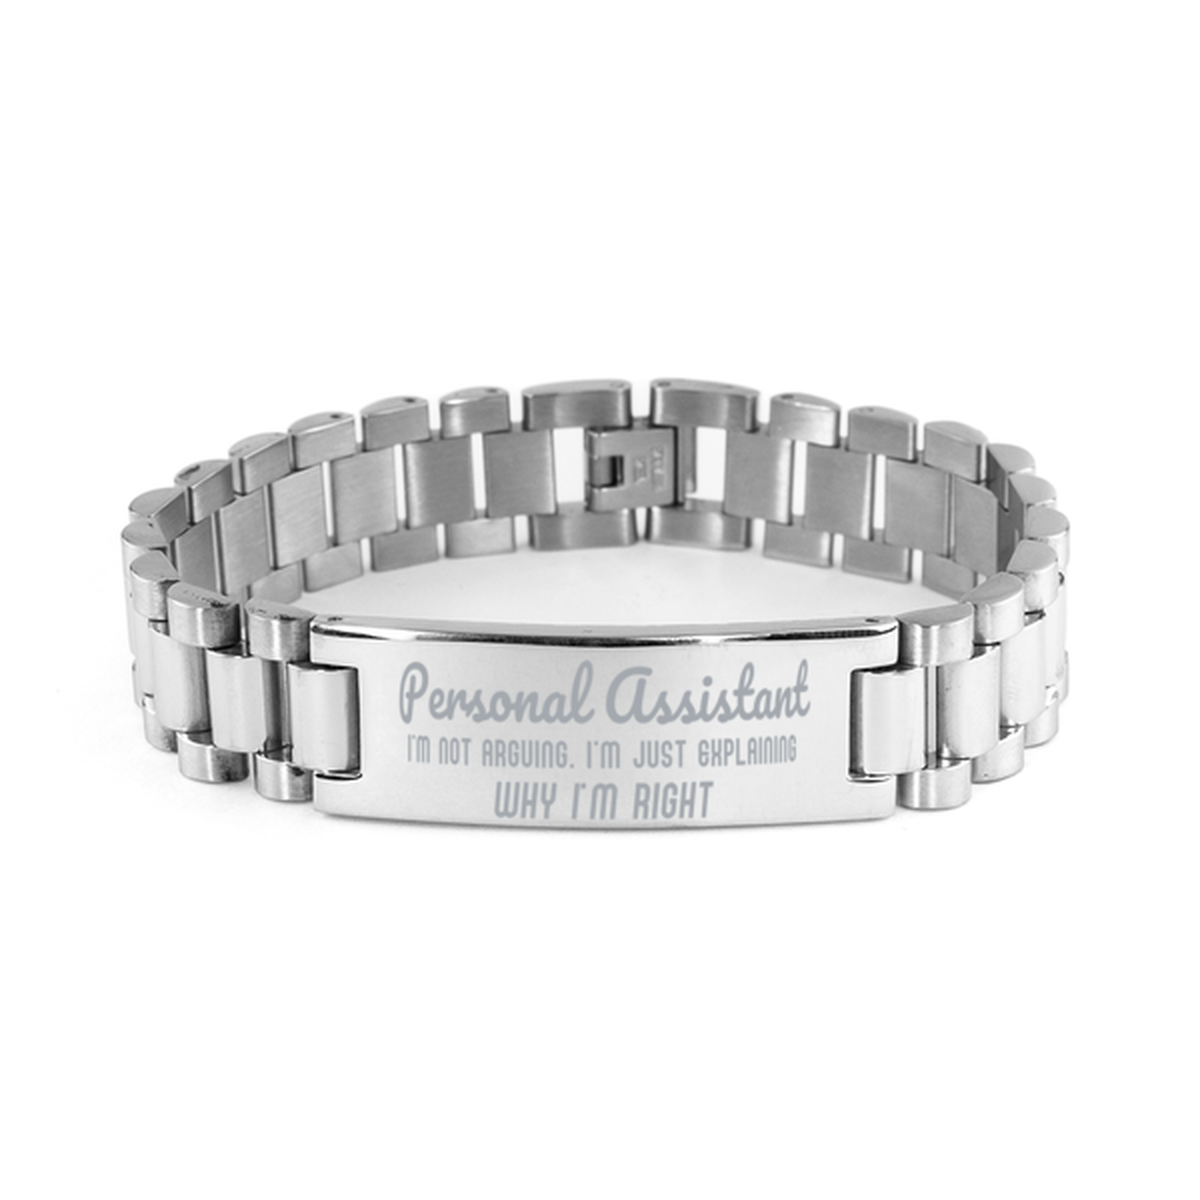 Personal Assistant I'm not Arguing. I'm Just Explaining Why I'm RIGHT Ladder Stainless Steel Bracelet, Graduation Birthday Christmas Personal Assistant Gifts For Personal Assistant Funny Saying Quote Present for Men Women Coworker